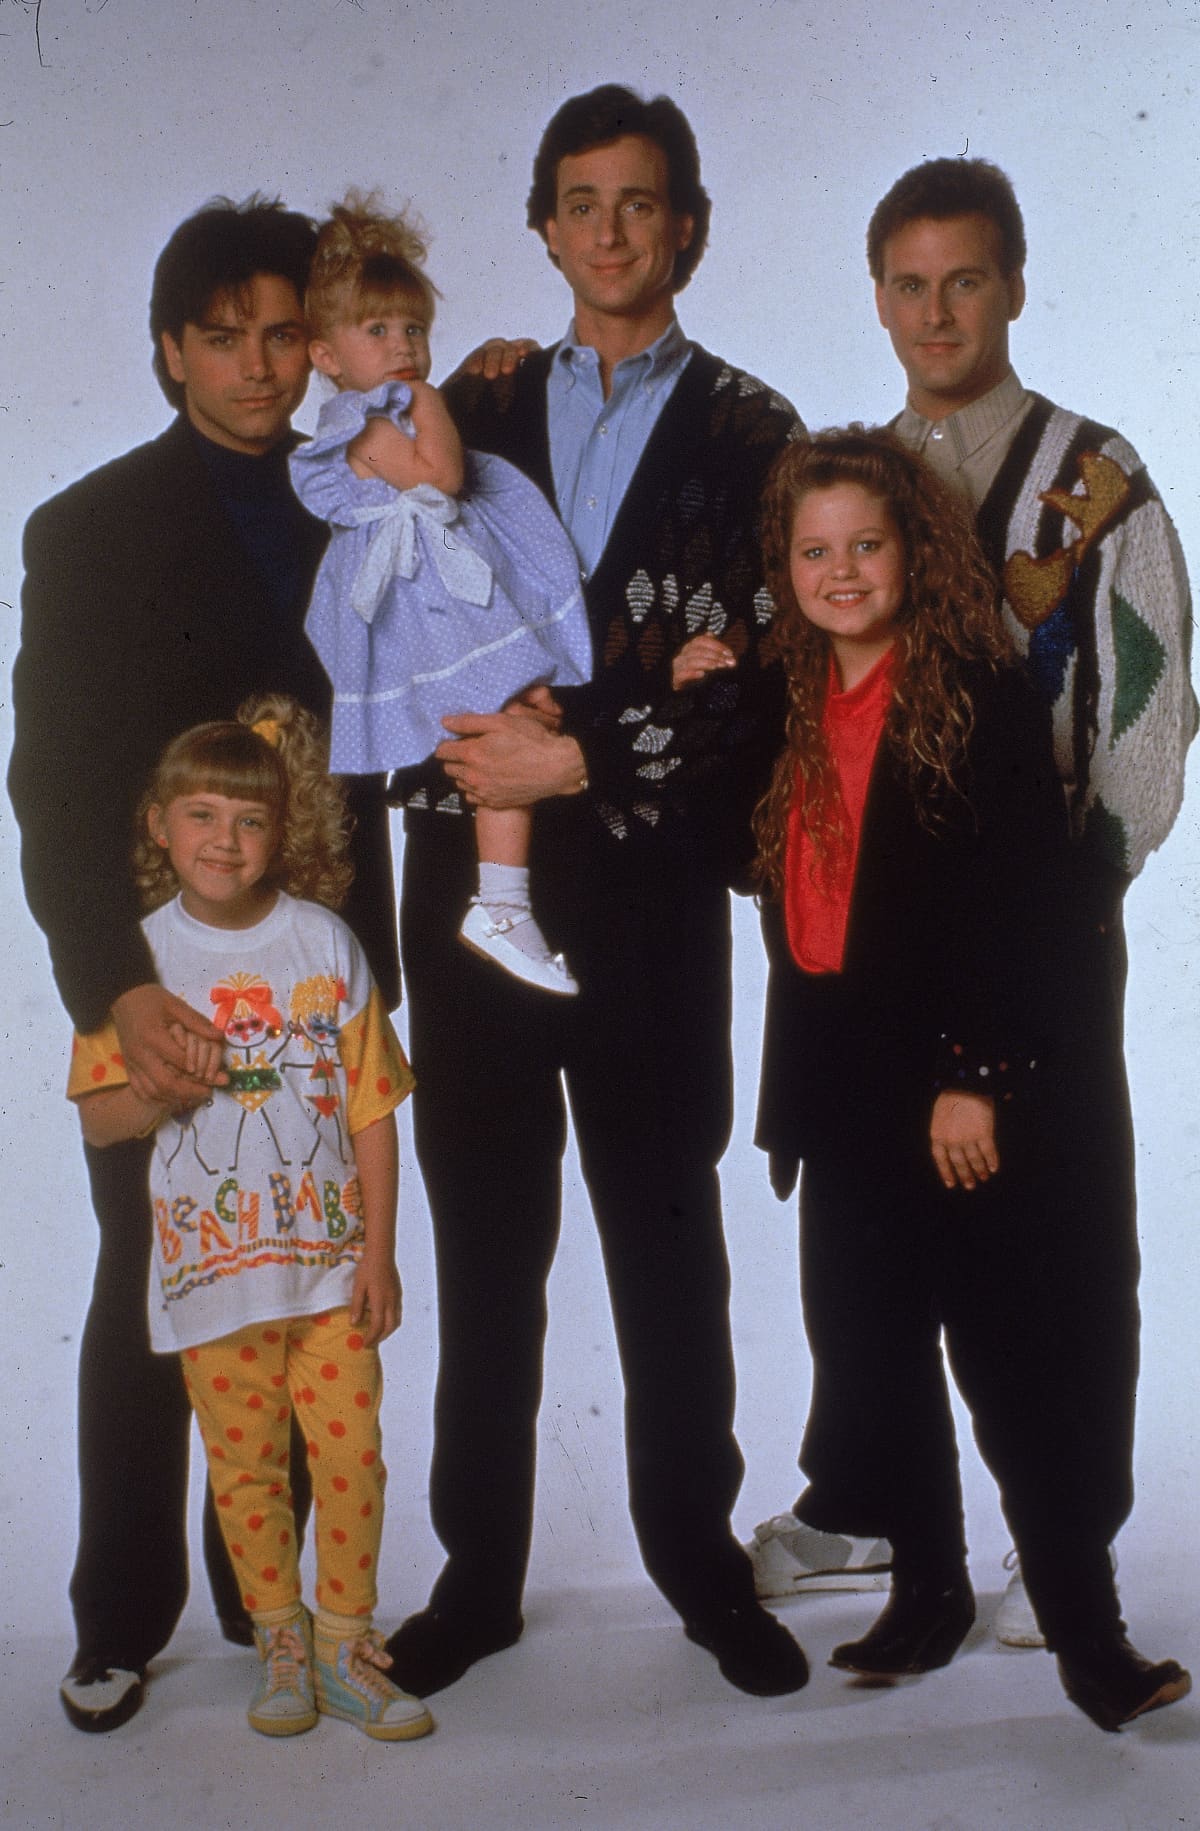 Portrait of the cast of the television program, 'Full House,' (left - right): John Stamos, Jodie Sweetin, Ashley or Mary-Kate Olsen, Bob Saget, Candace Cameron, and David Coulier, c. 1989. (Photo by Fotos International/Getty Images)